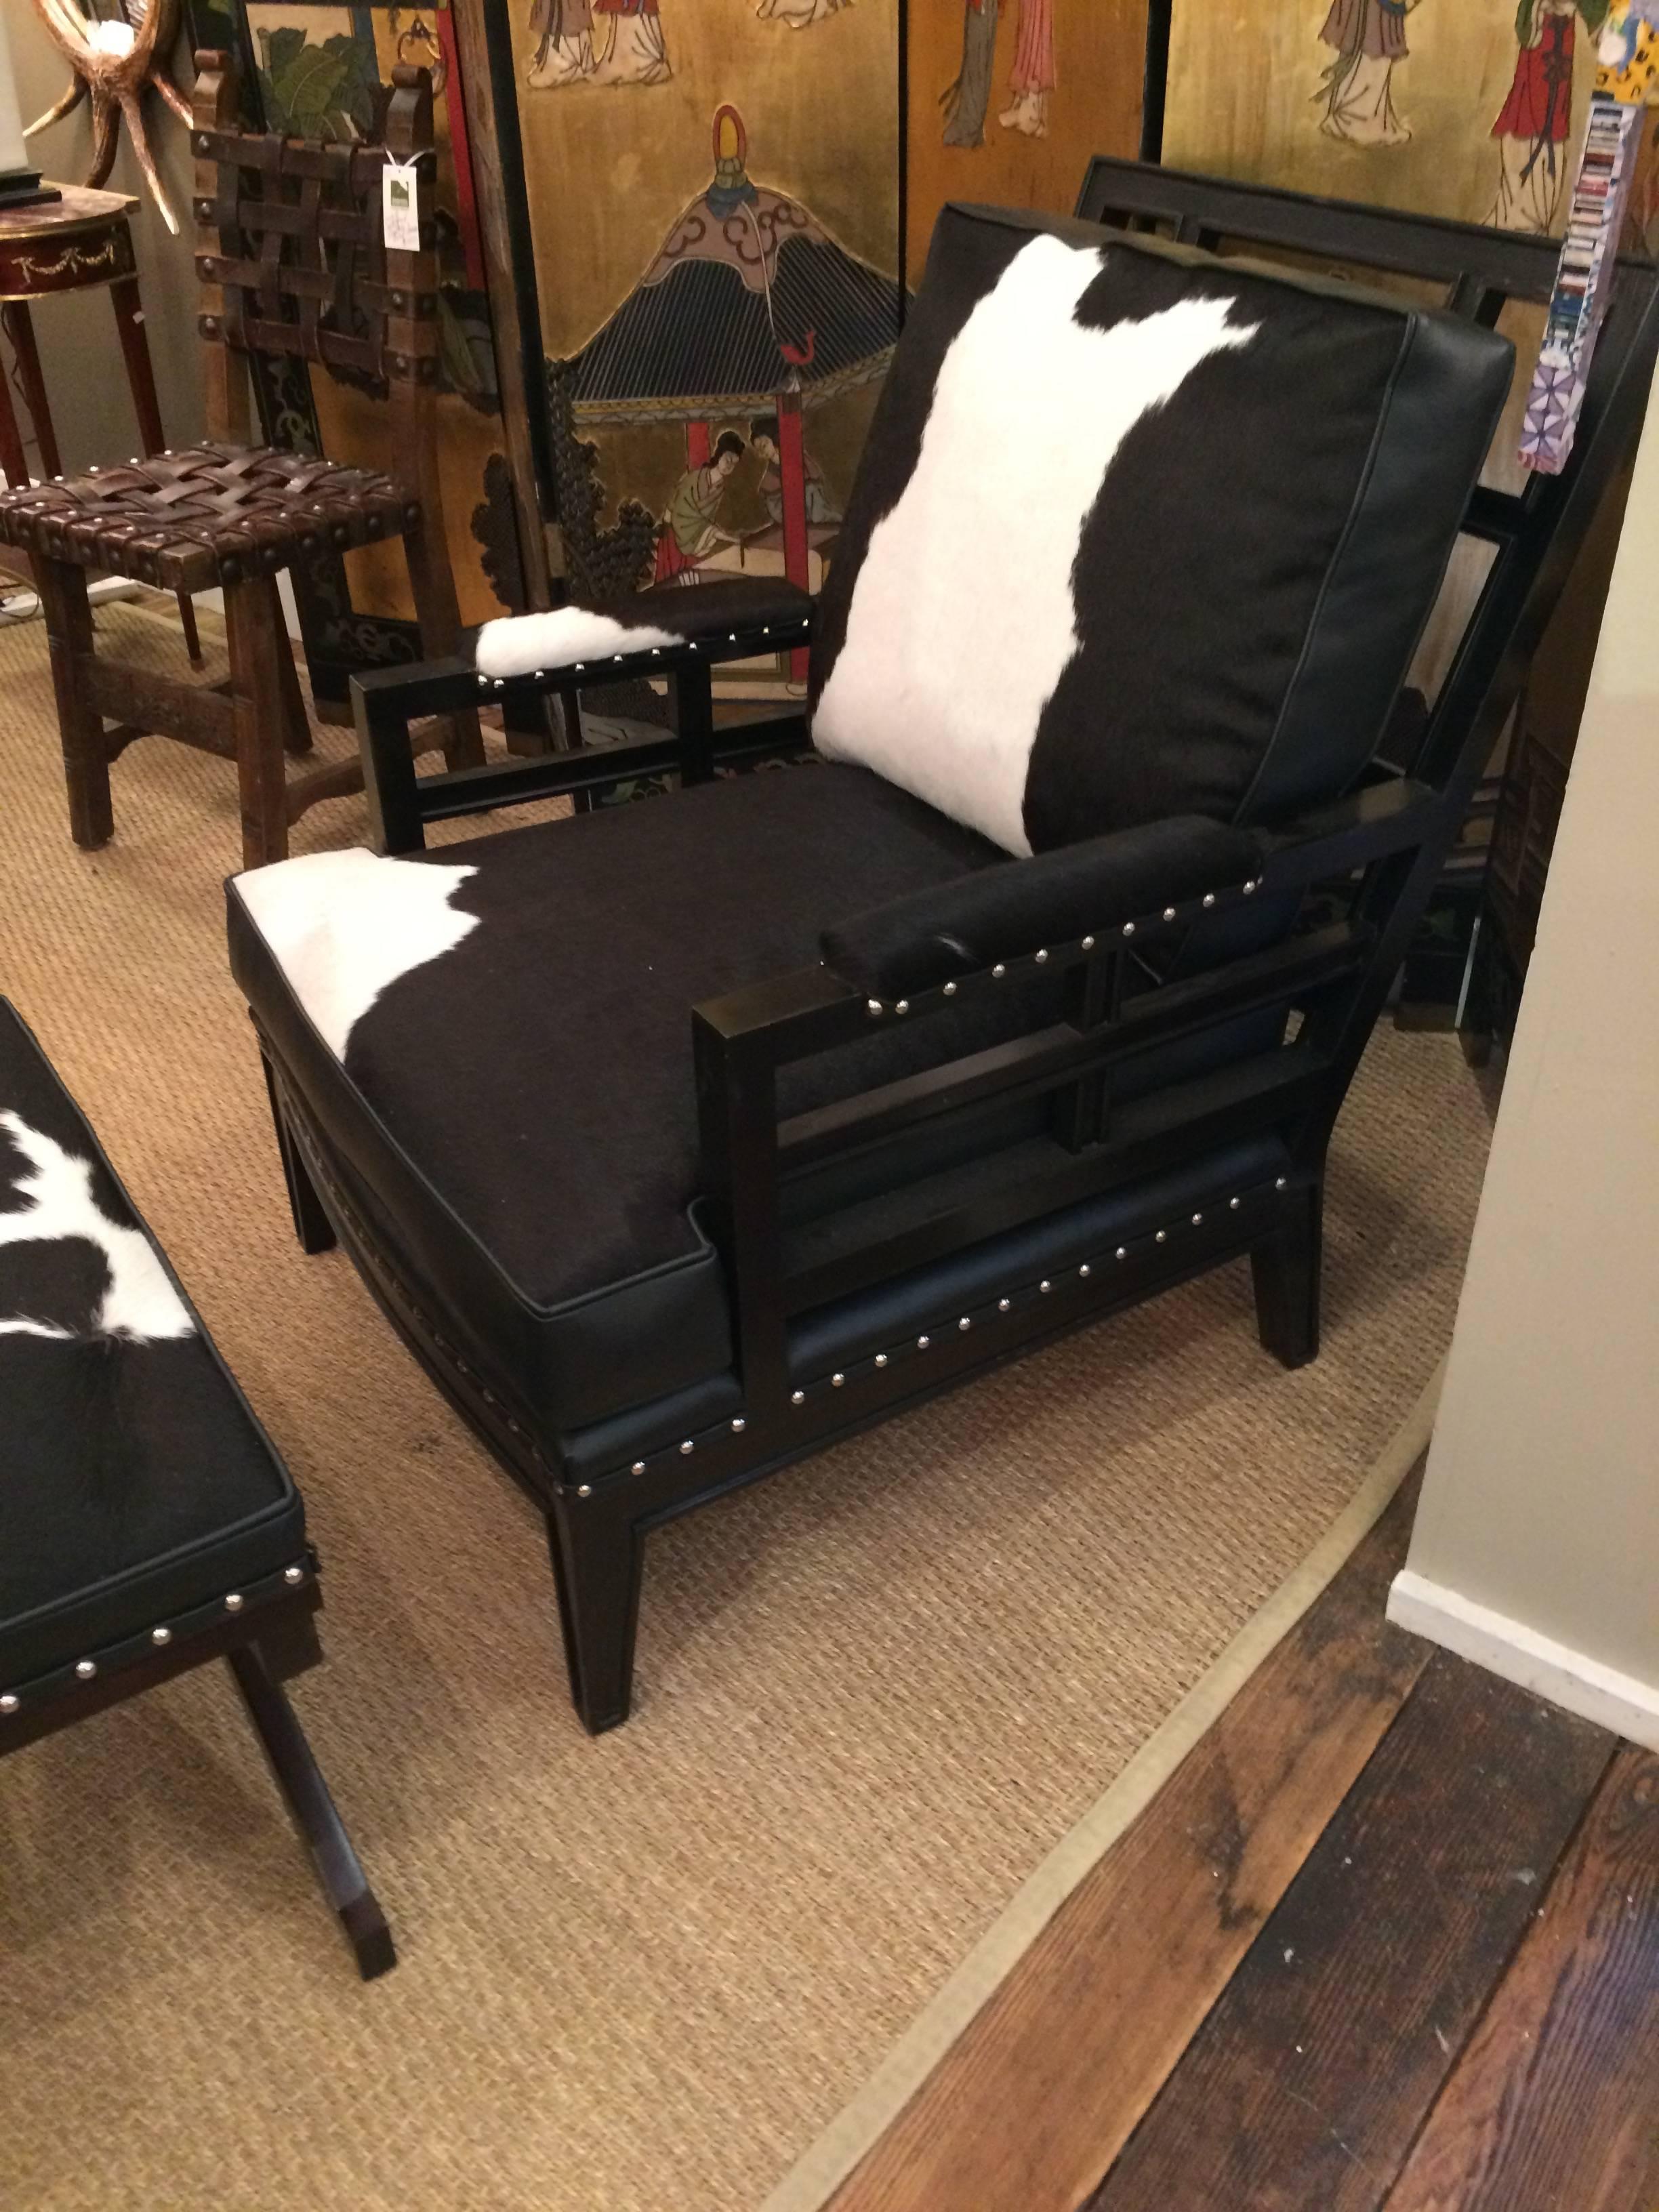 Fabulously chic custom club chair having ebonized wood and a mix of black leather and black and white cowhide upholstery, finished with nailheads.